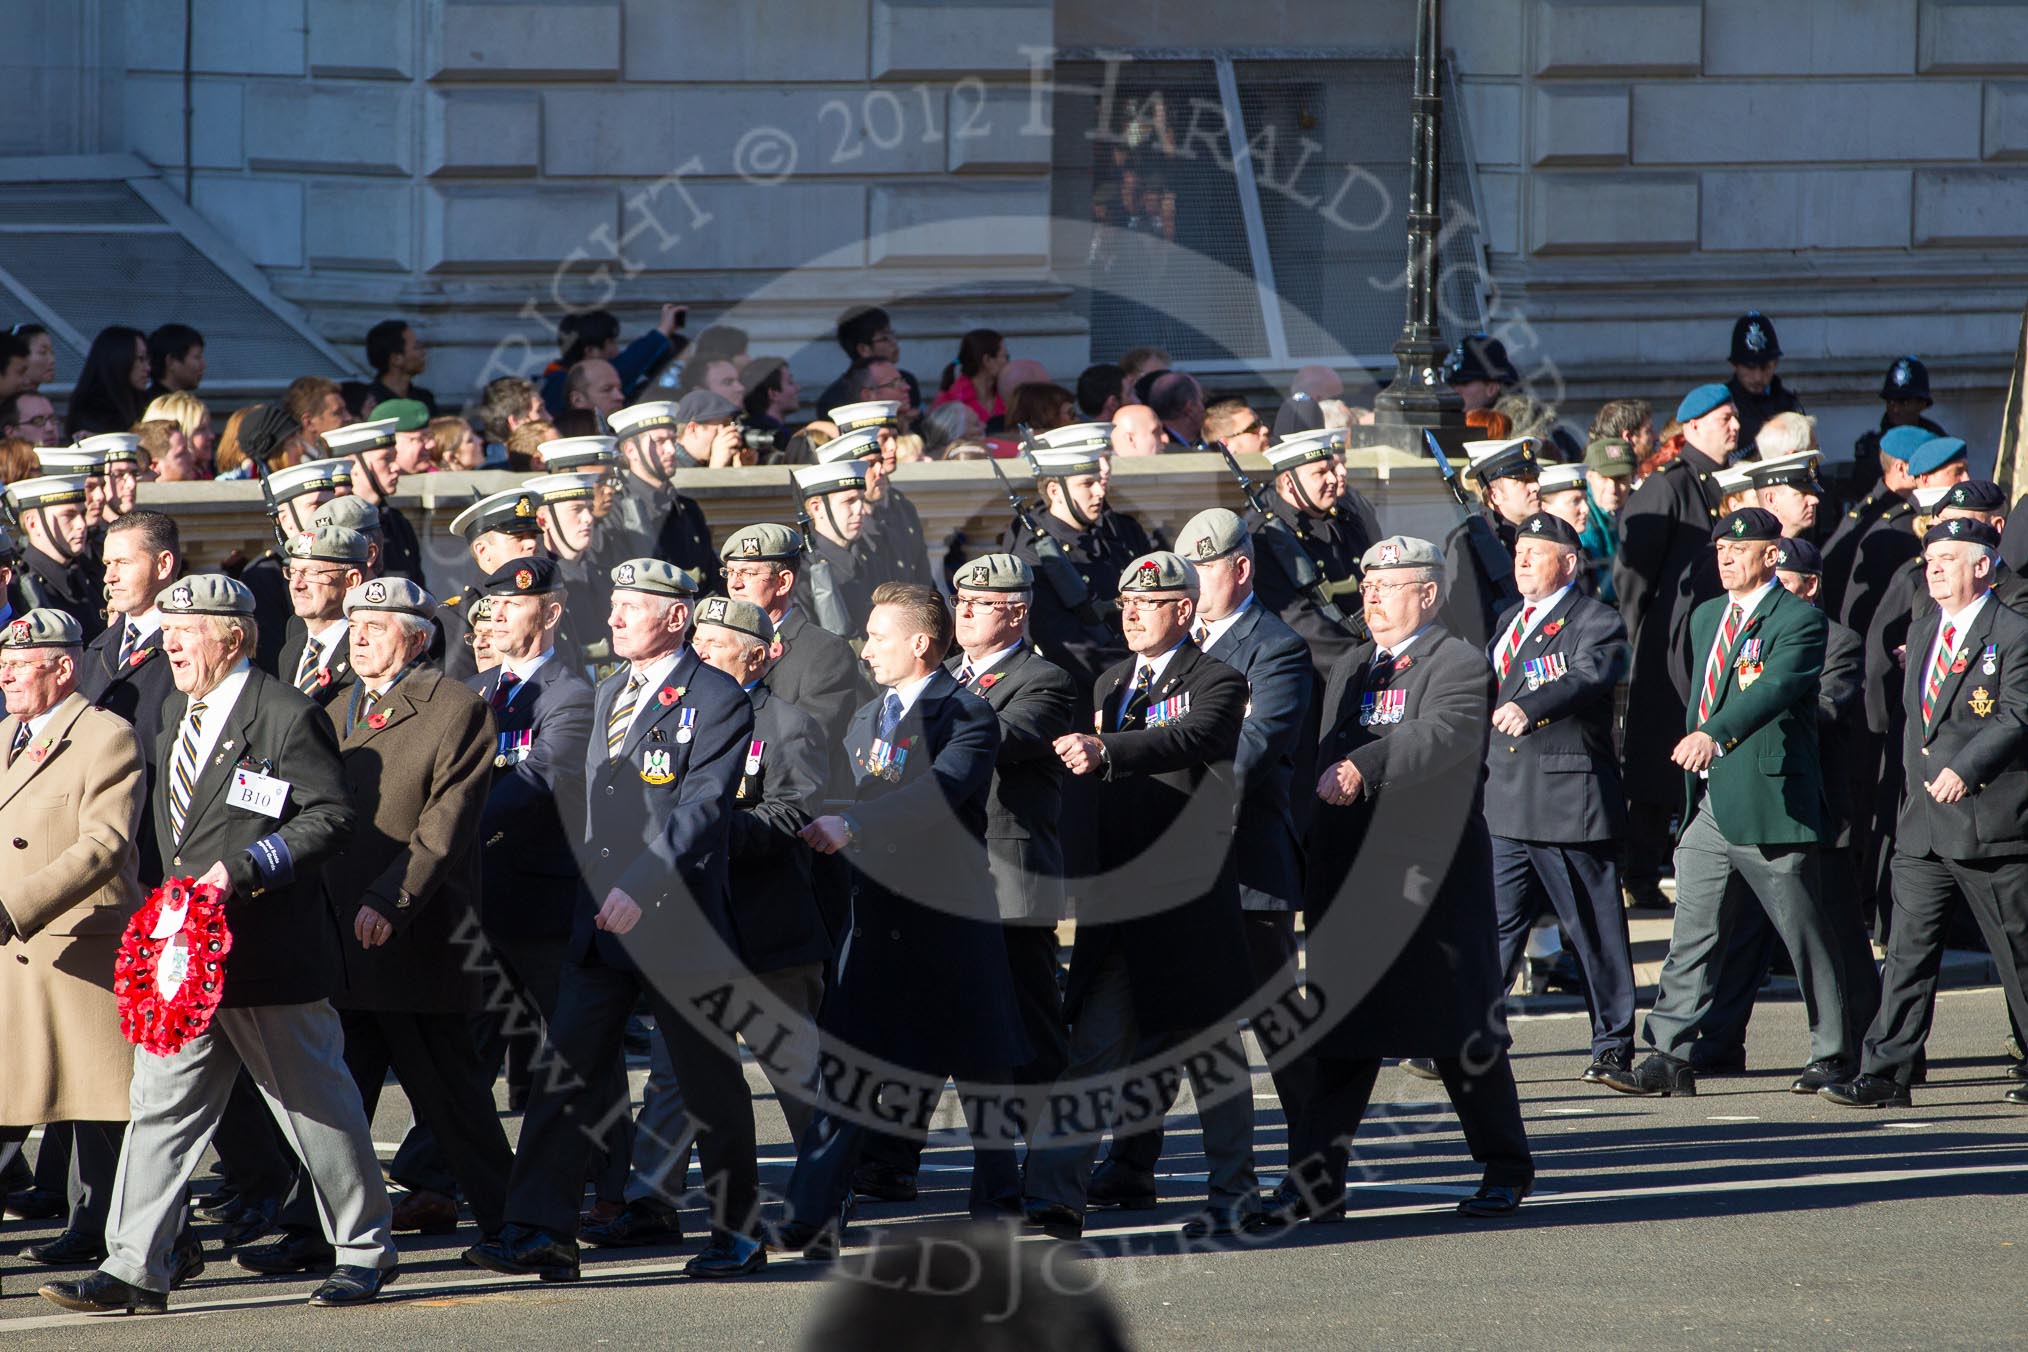 Remembrance Sunday 2012 Cenotaph March Past: Group  B10 - Royal Scots Dragoon Guards and B11 - Royal Dragoon Guards ..
Whitehall, Cenotaph,
London SW1,

United Kingdom,
on 11 November 2012 at 11:56, image #862